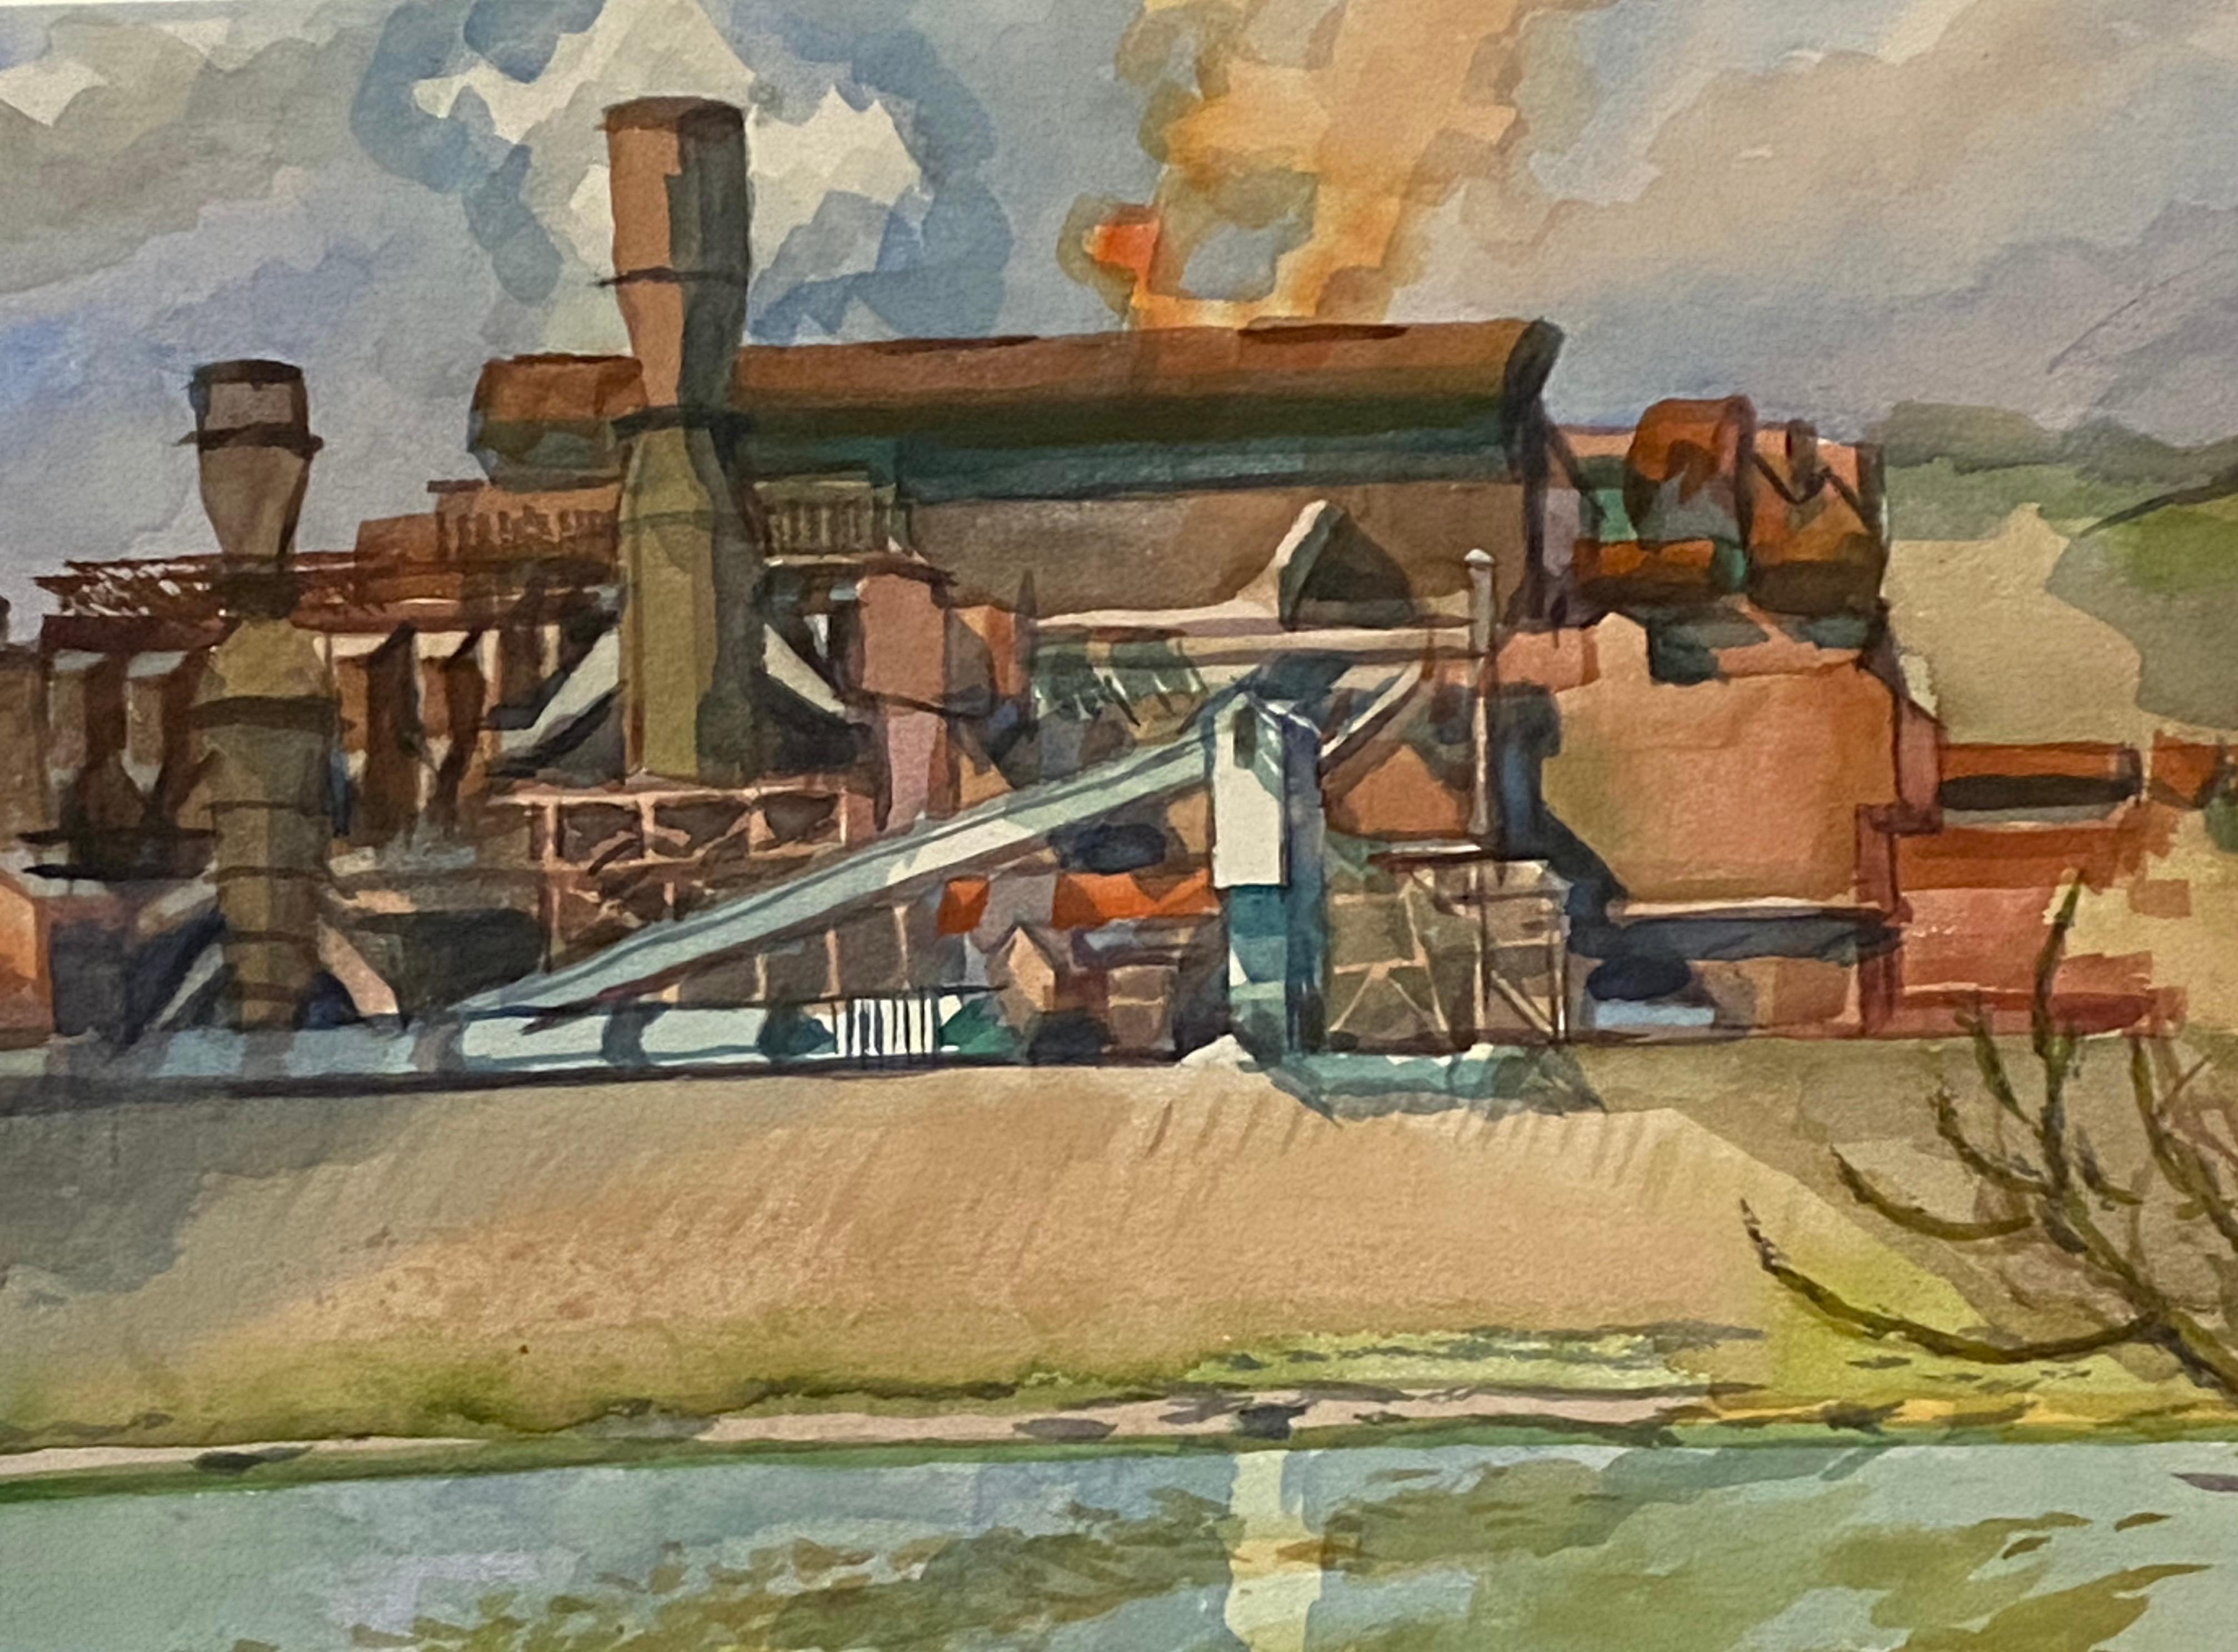 Industrial Landscape Contemporary American Watercolor Magic Realism 20th Century

Henry Koerner (1915-1991)
J&L Oxygen Plant
18 x 24 1/2 inches
Watercolor on paper
Framed 27 x 32 inches, 
Provenance and labels verso: Southern Alleghenies Museum of